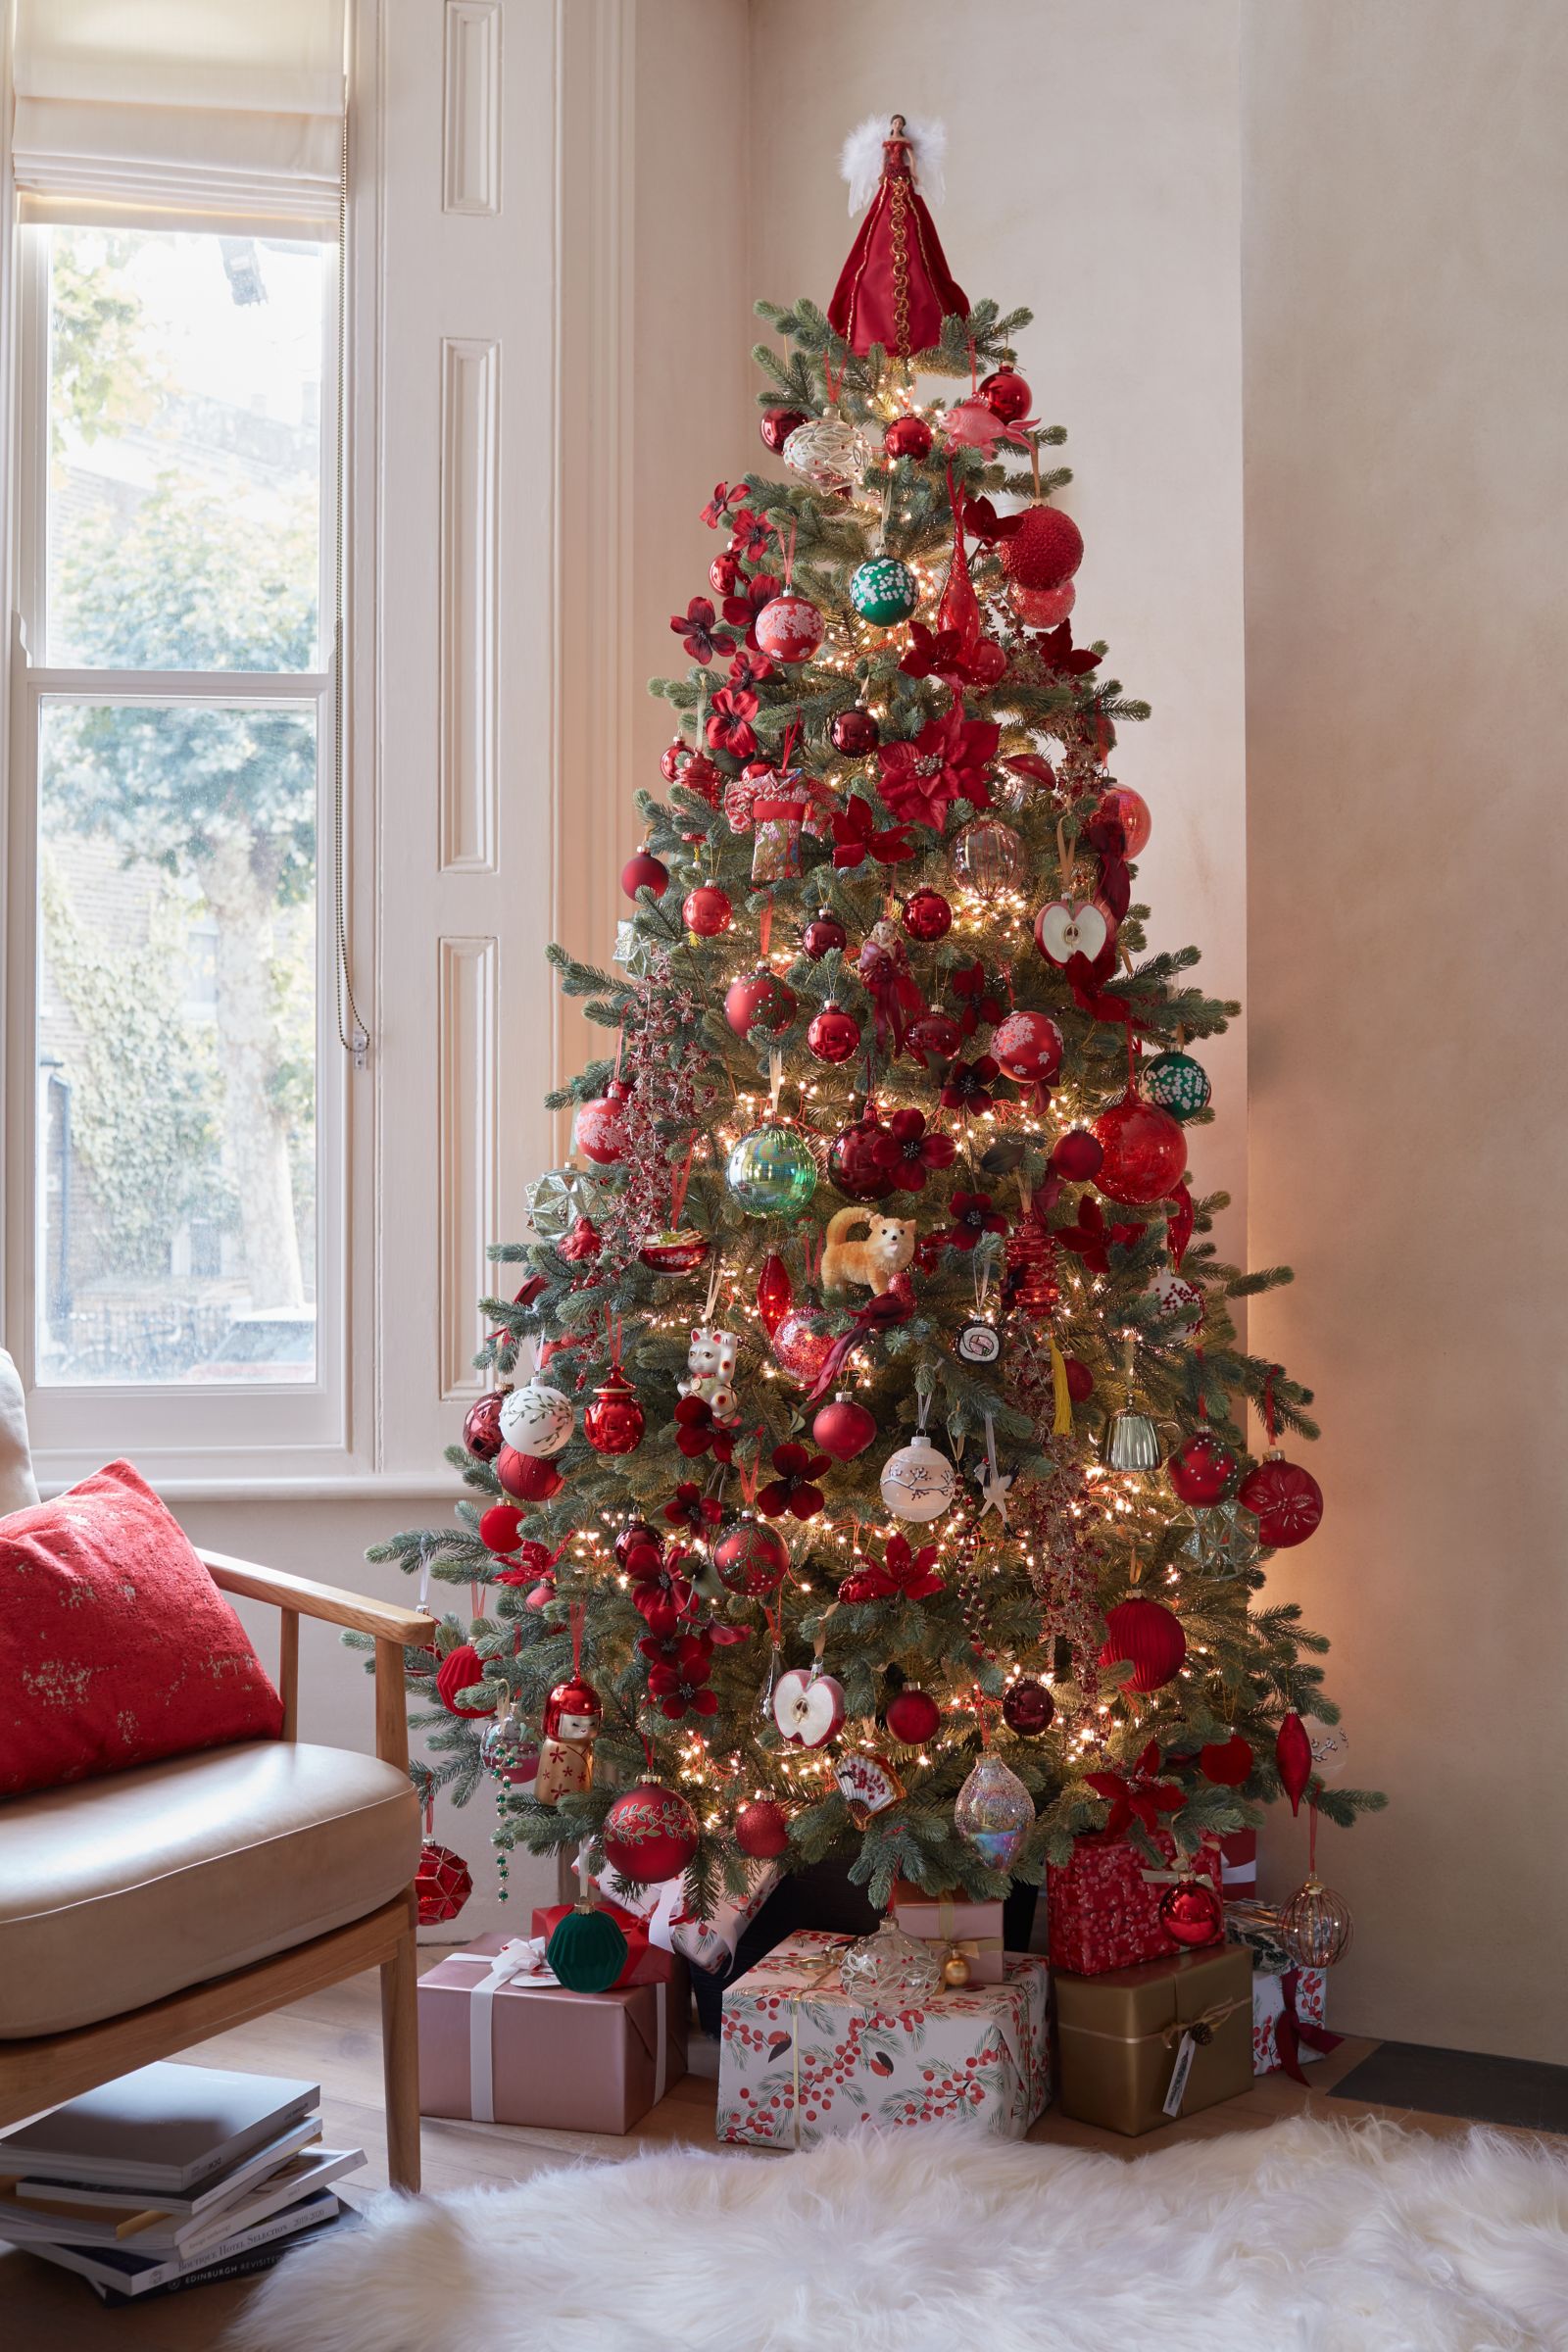 Ideas on how to decorate a Christmas Tree | John Lewis & Partners